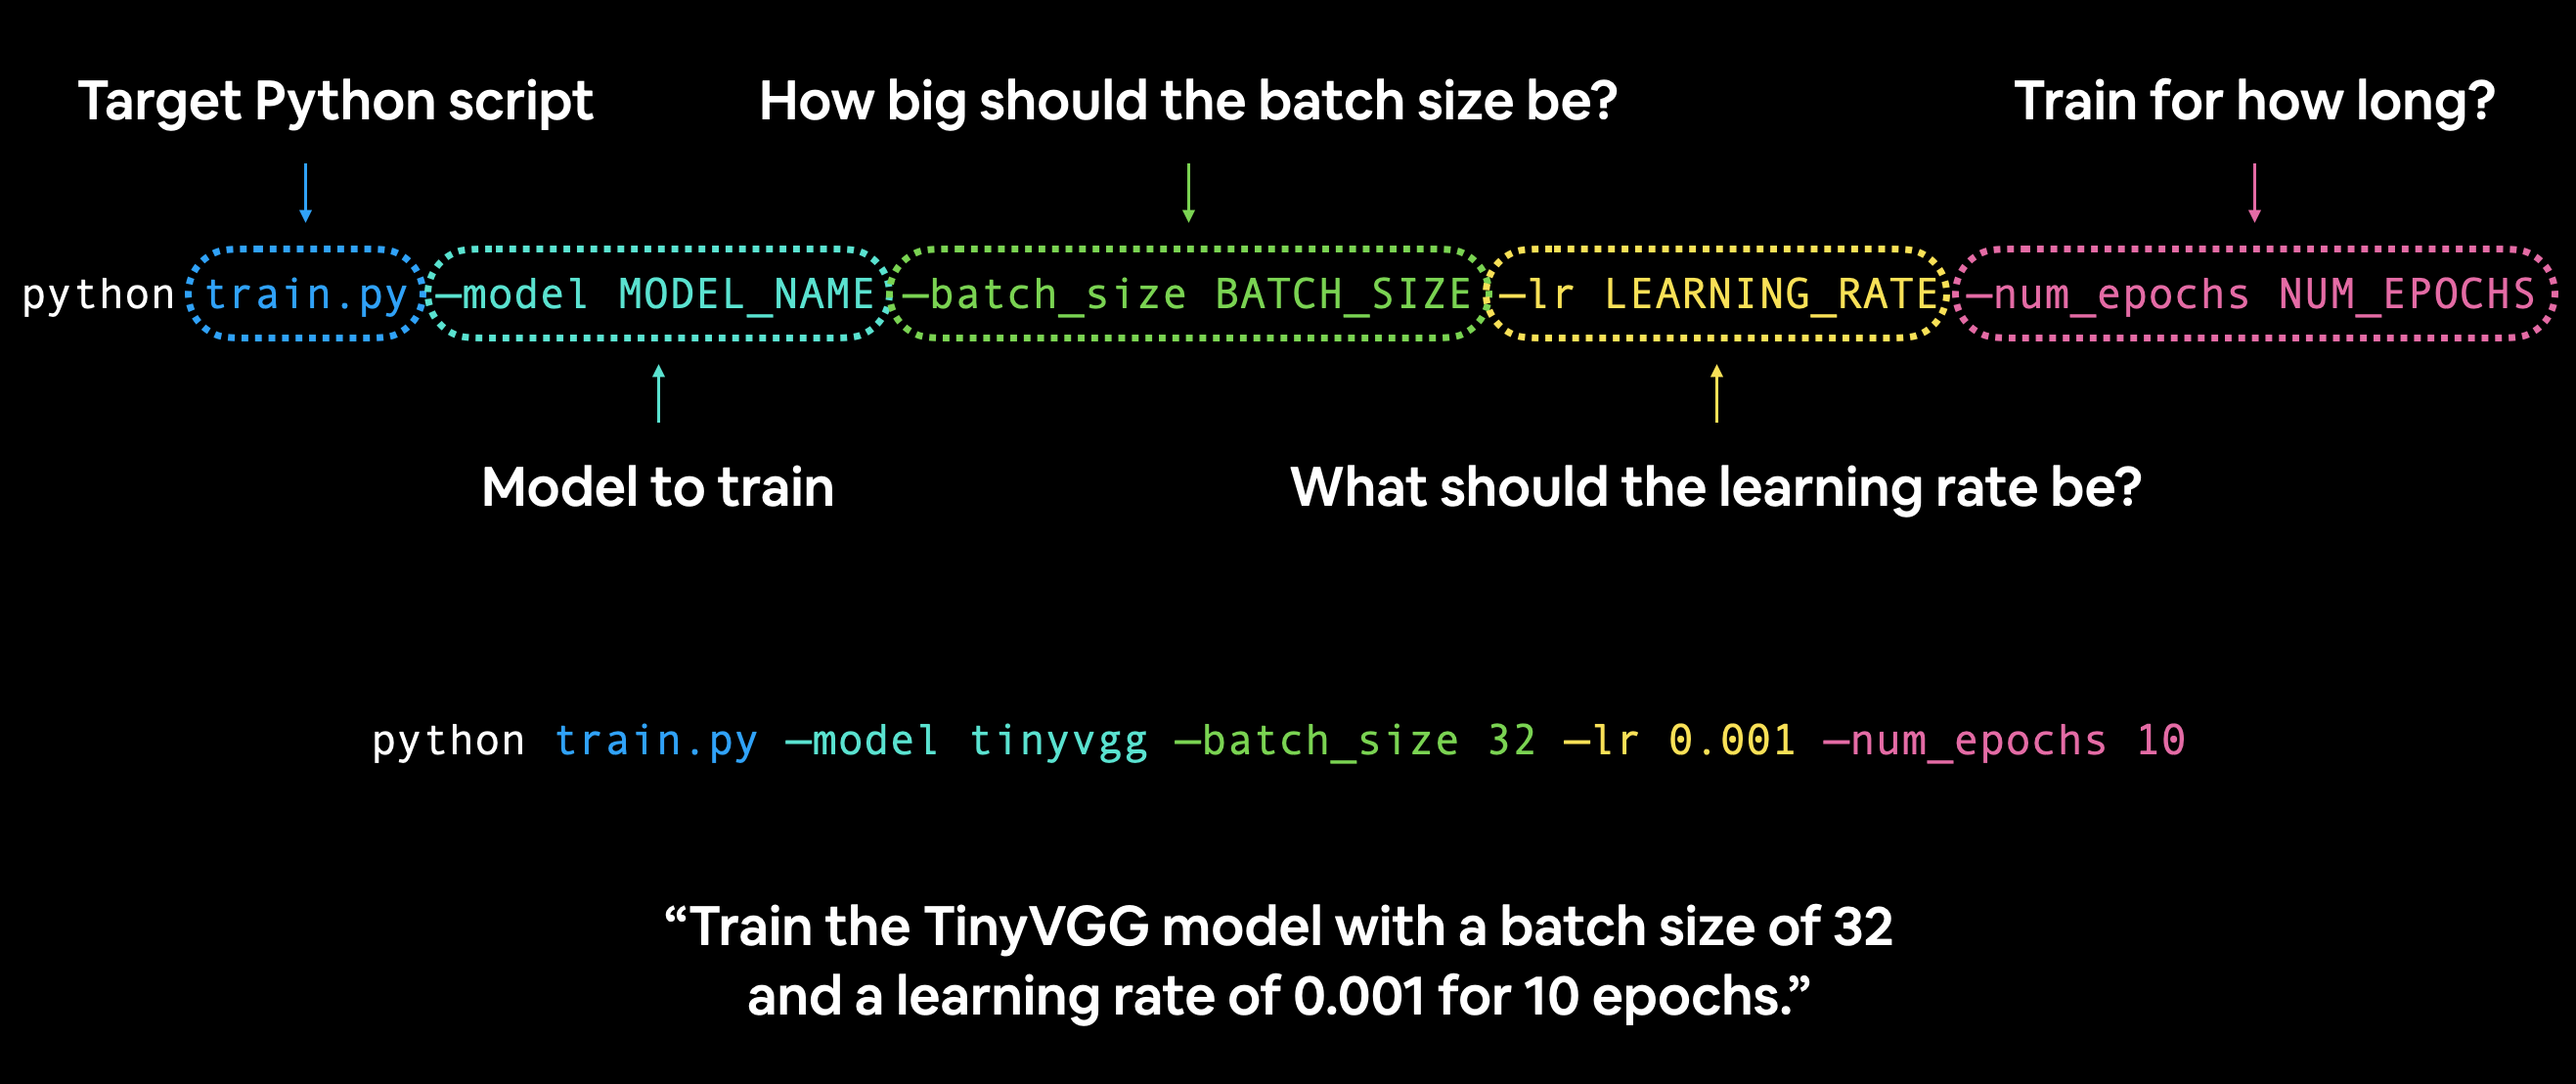 command line call for training a PyTorch model with different hyperparameters